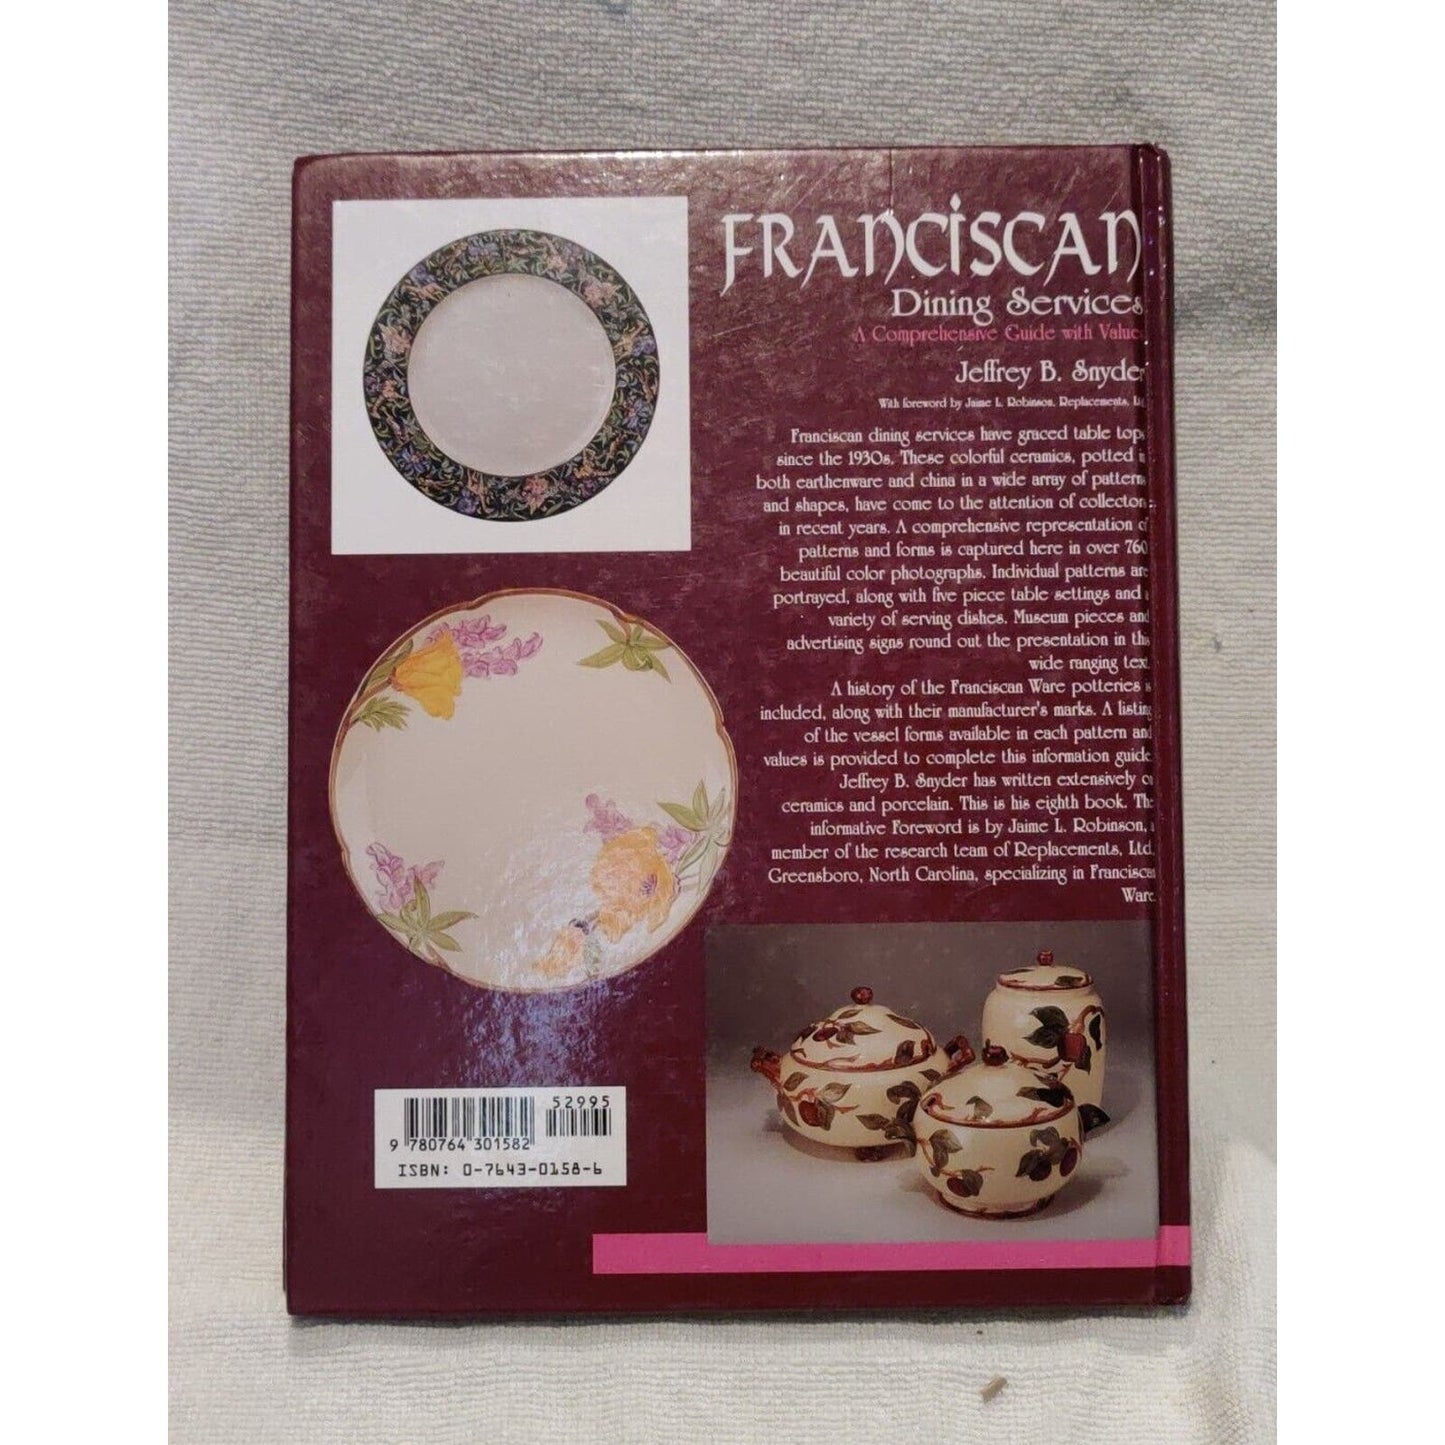 Schiffer Book for Collectors: Franciscan Dining Services by Jeffrey B. Snyder